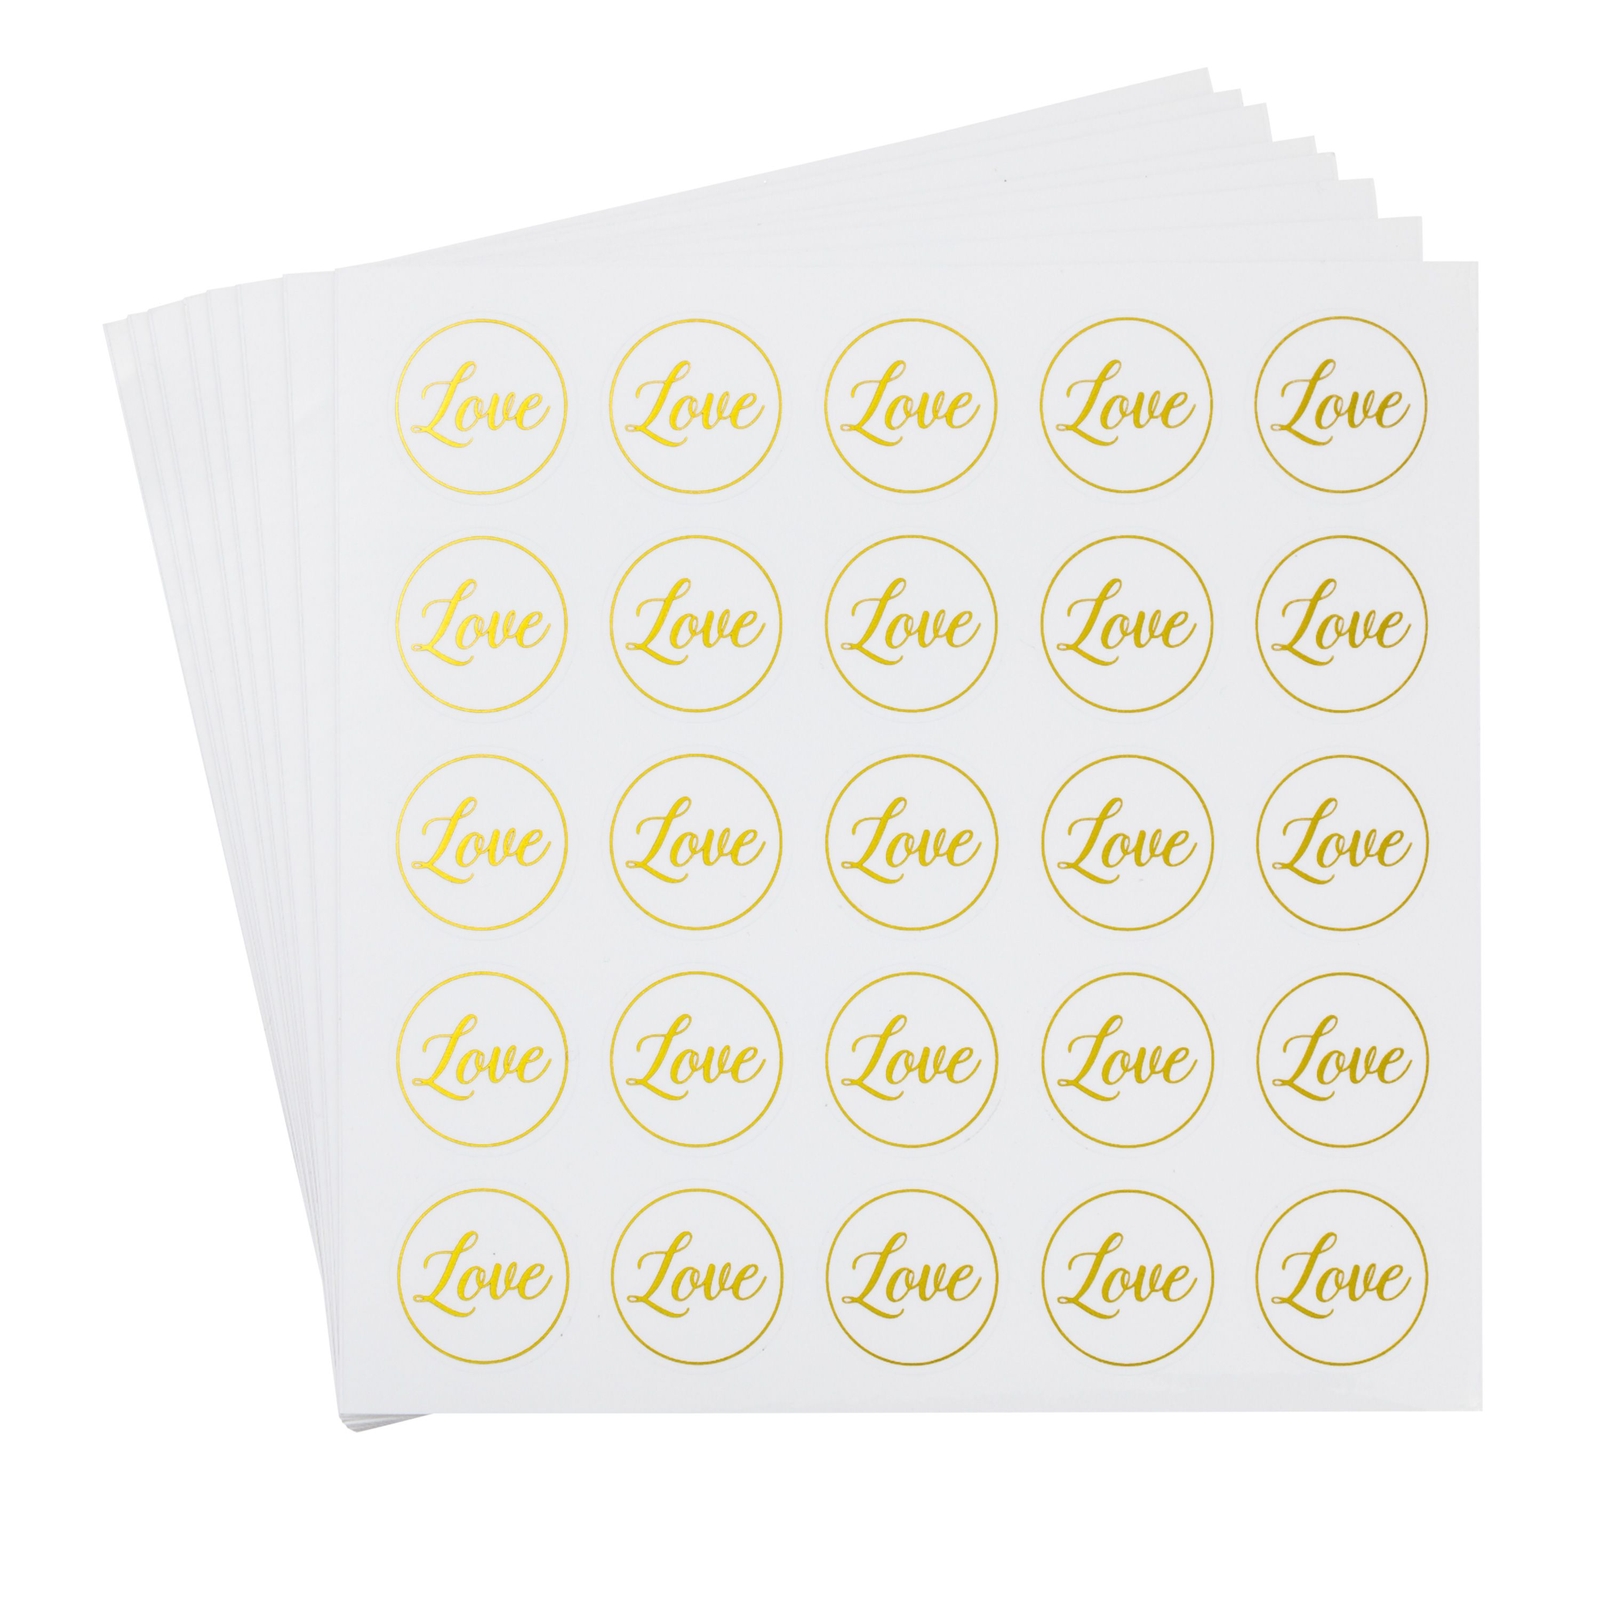 Clear Stickers - 200-Count Wedding Stickers, Gold Envelope Seal Stickers  with Love, Adhesive Label for Bridal Shower Invitation, Wedding Invite,  Birthday Card, 1 Inches Diameter 